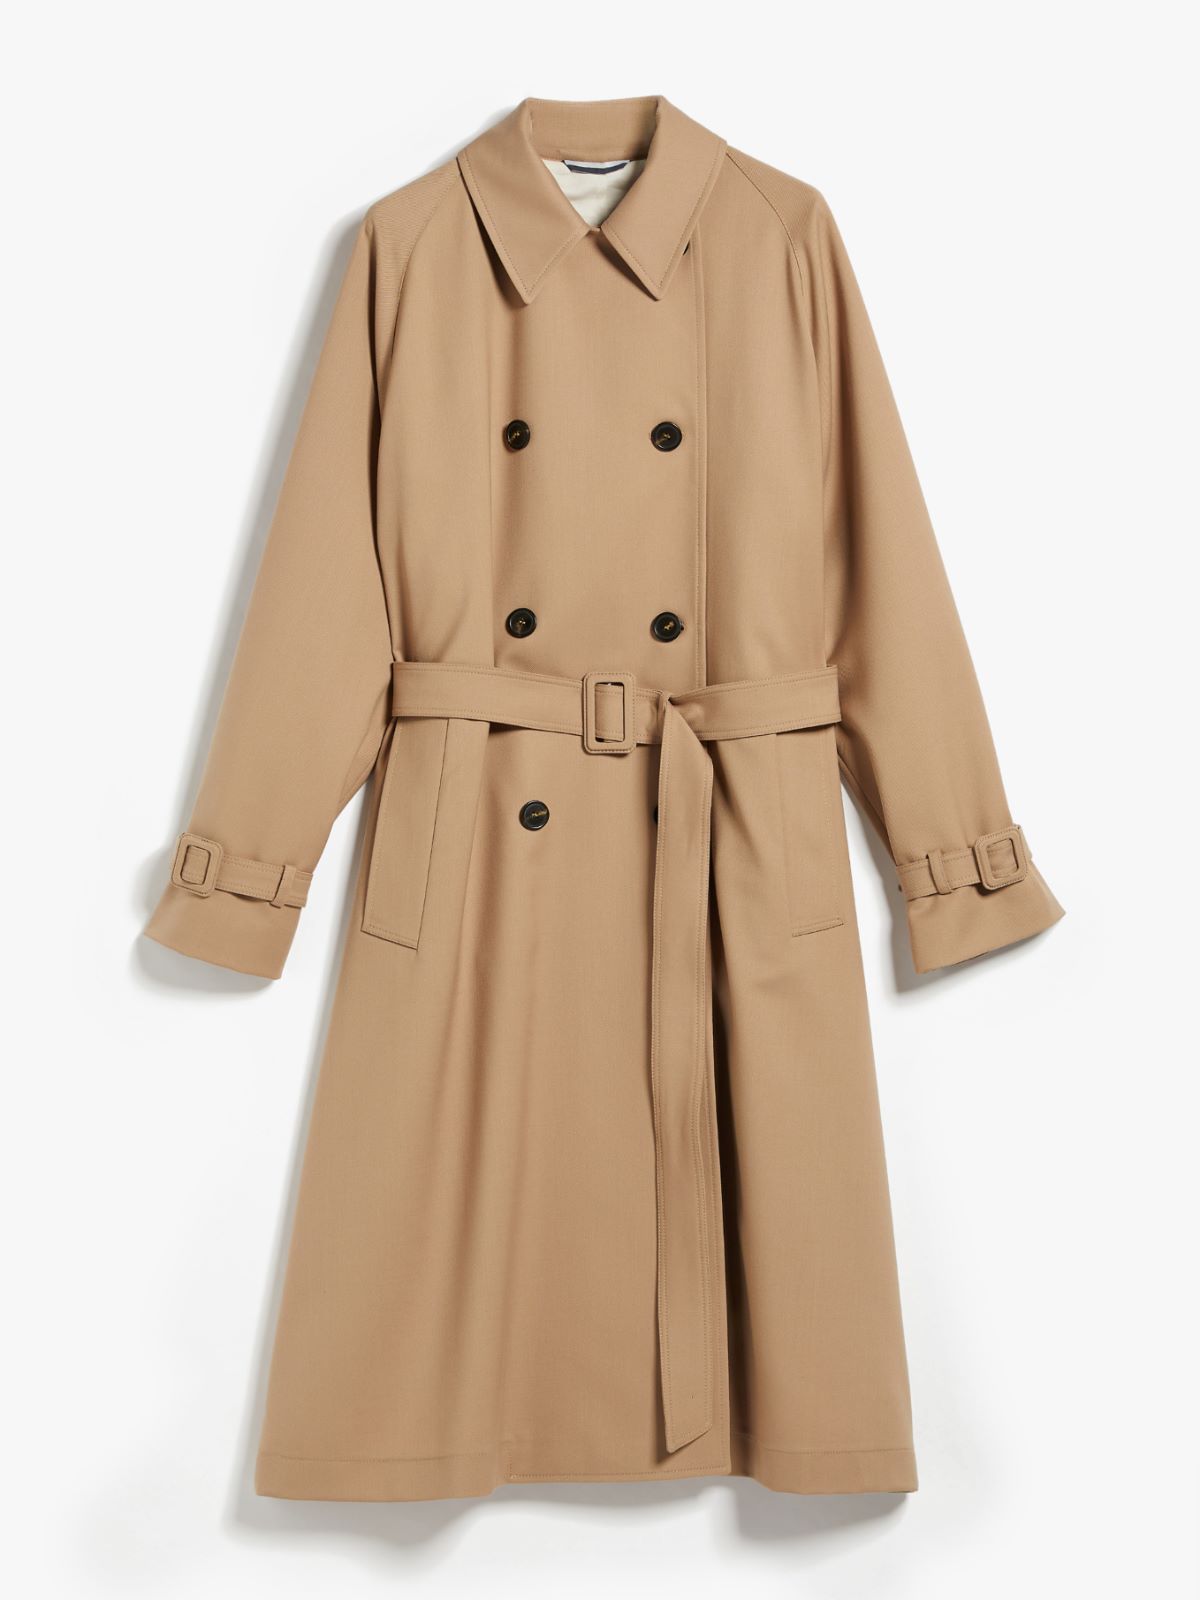 Double-breasted trench coat in showerproof fabric - CAMEL - Weekend Max Mara - 5